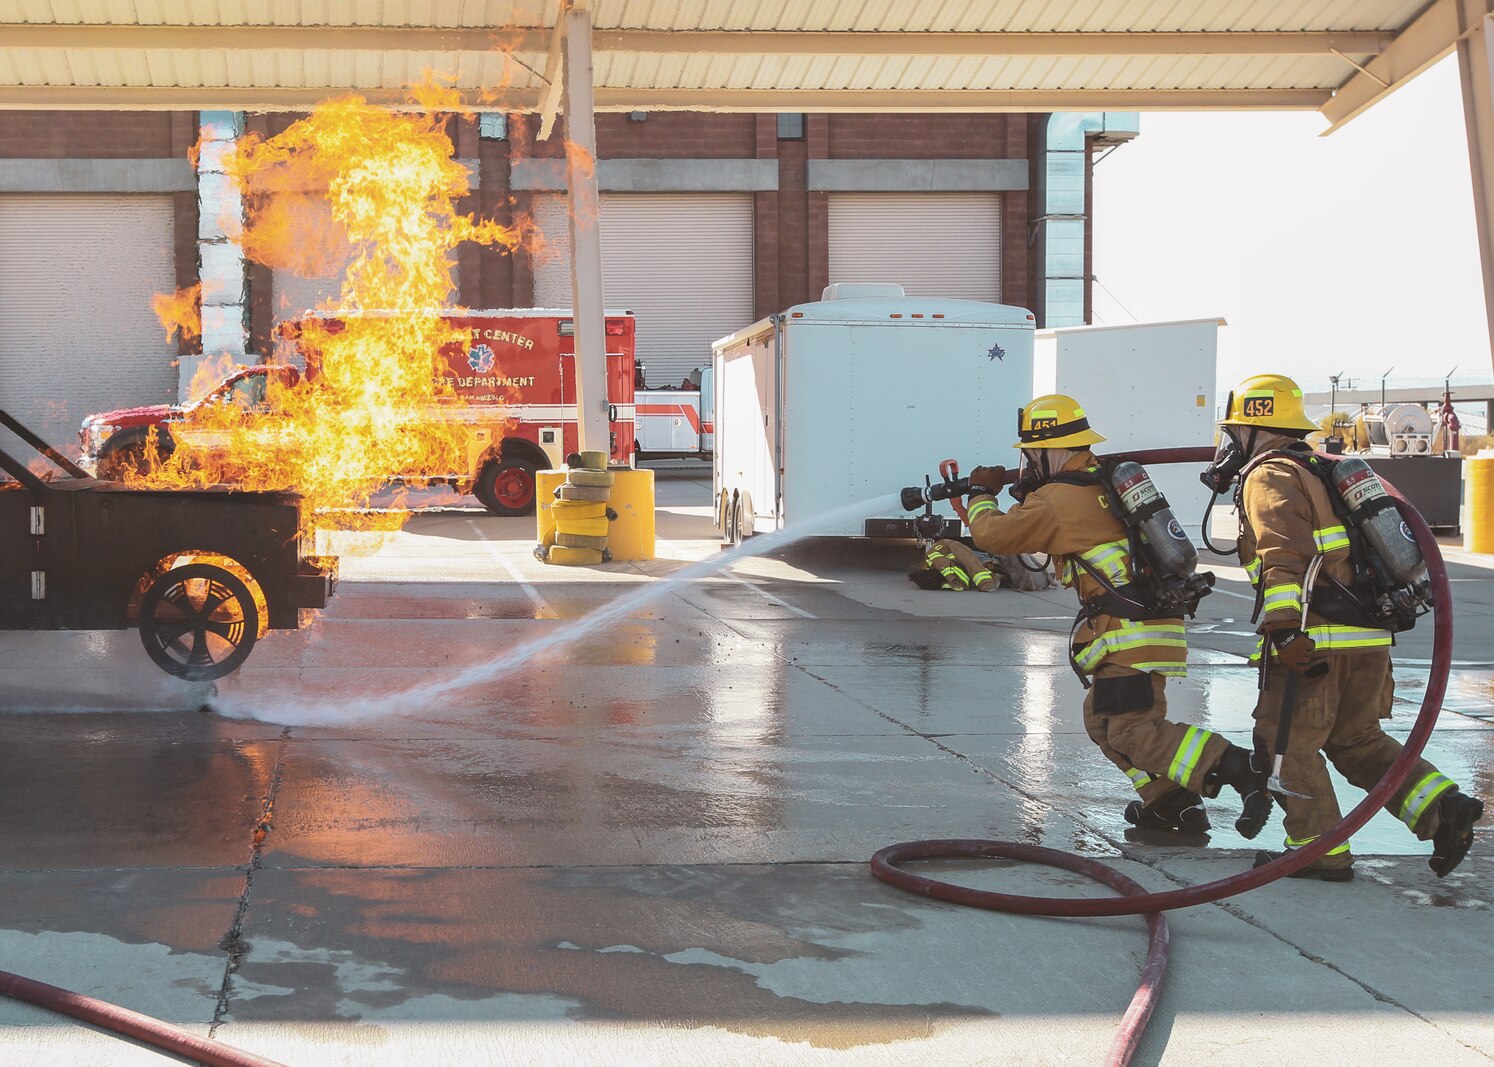 firefighters with the Combat Center Fire Department conduct vehicle fire drills